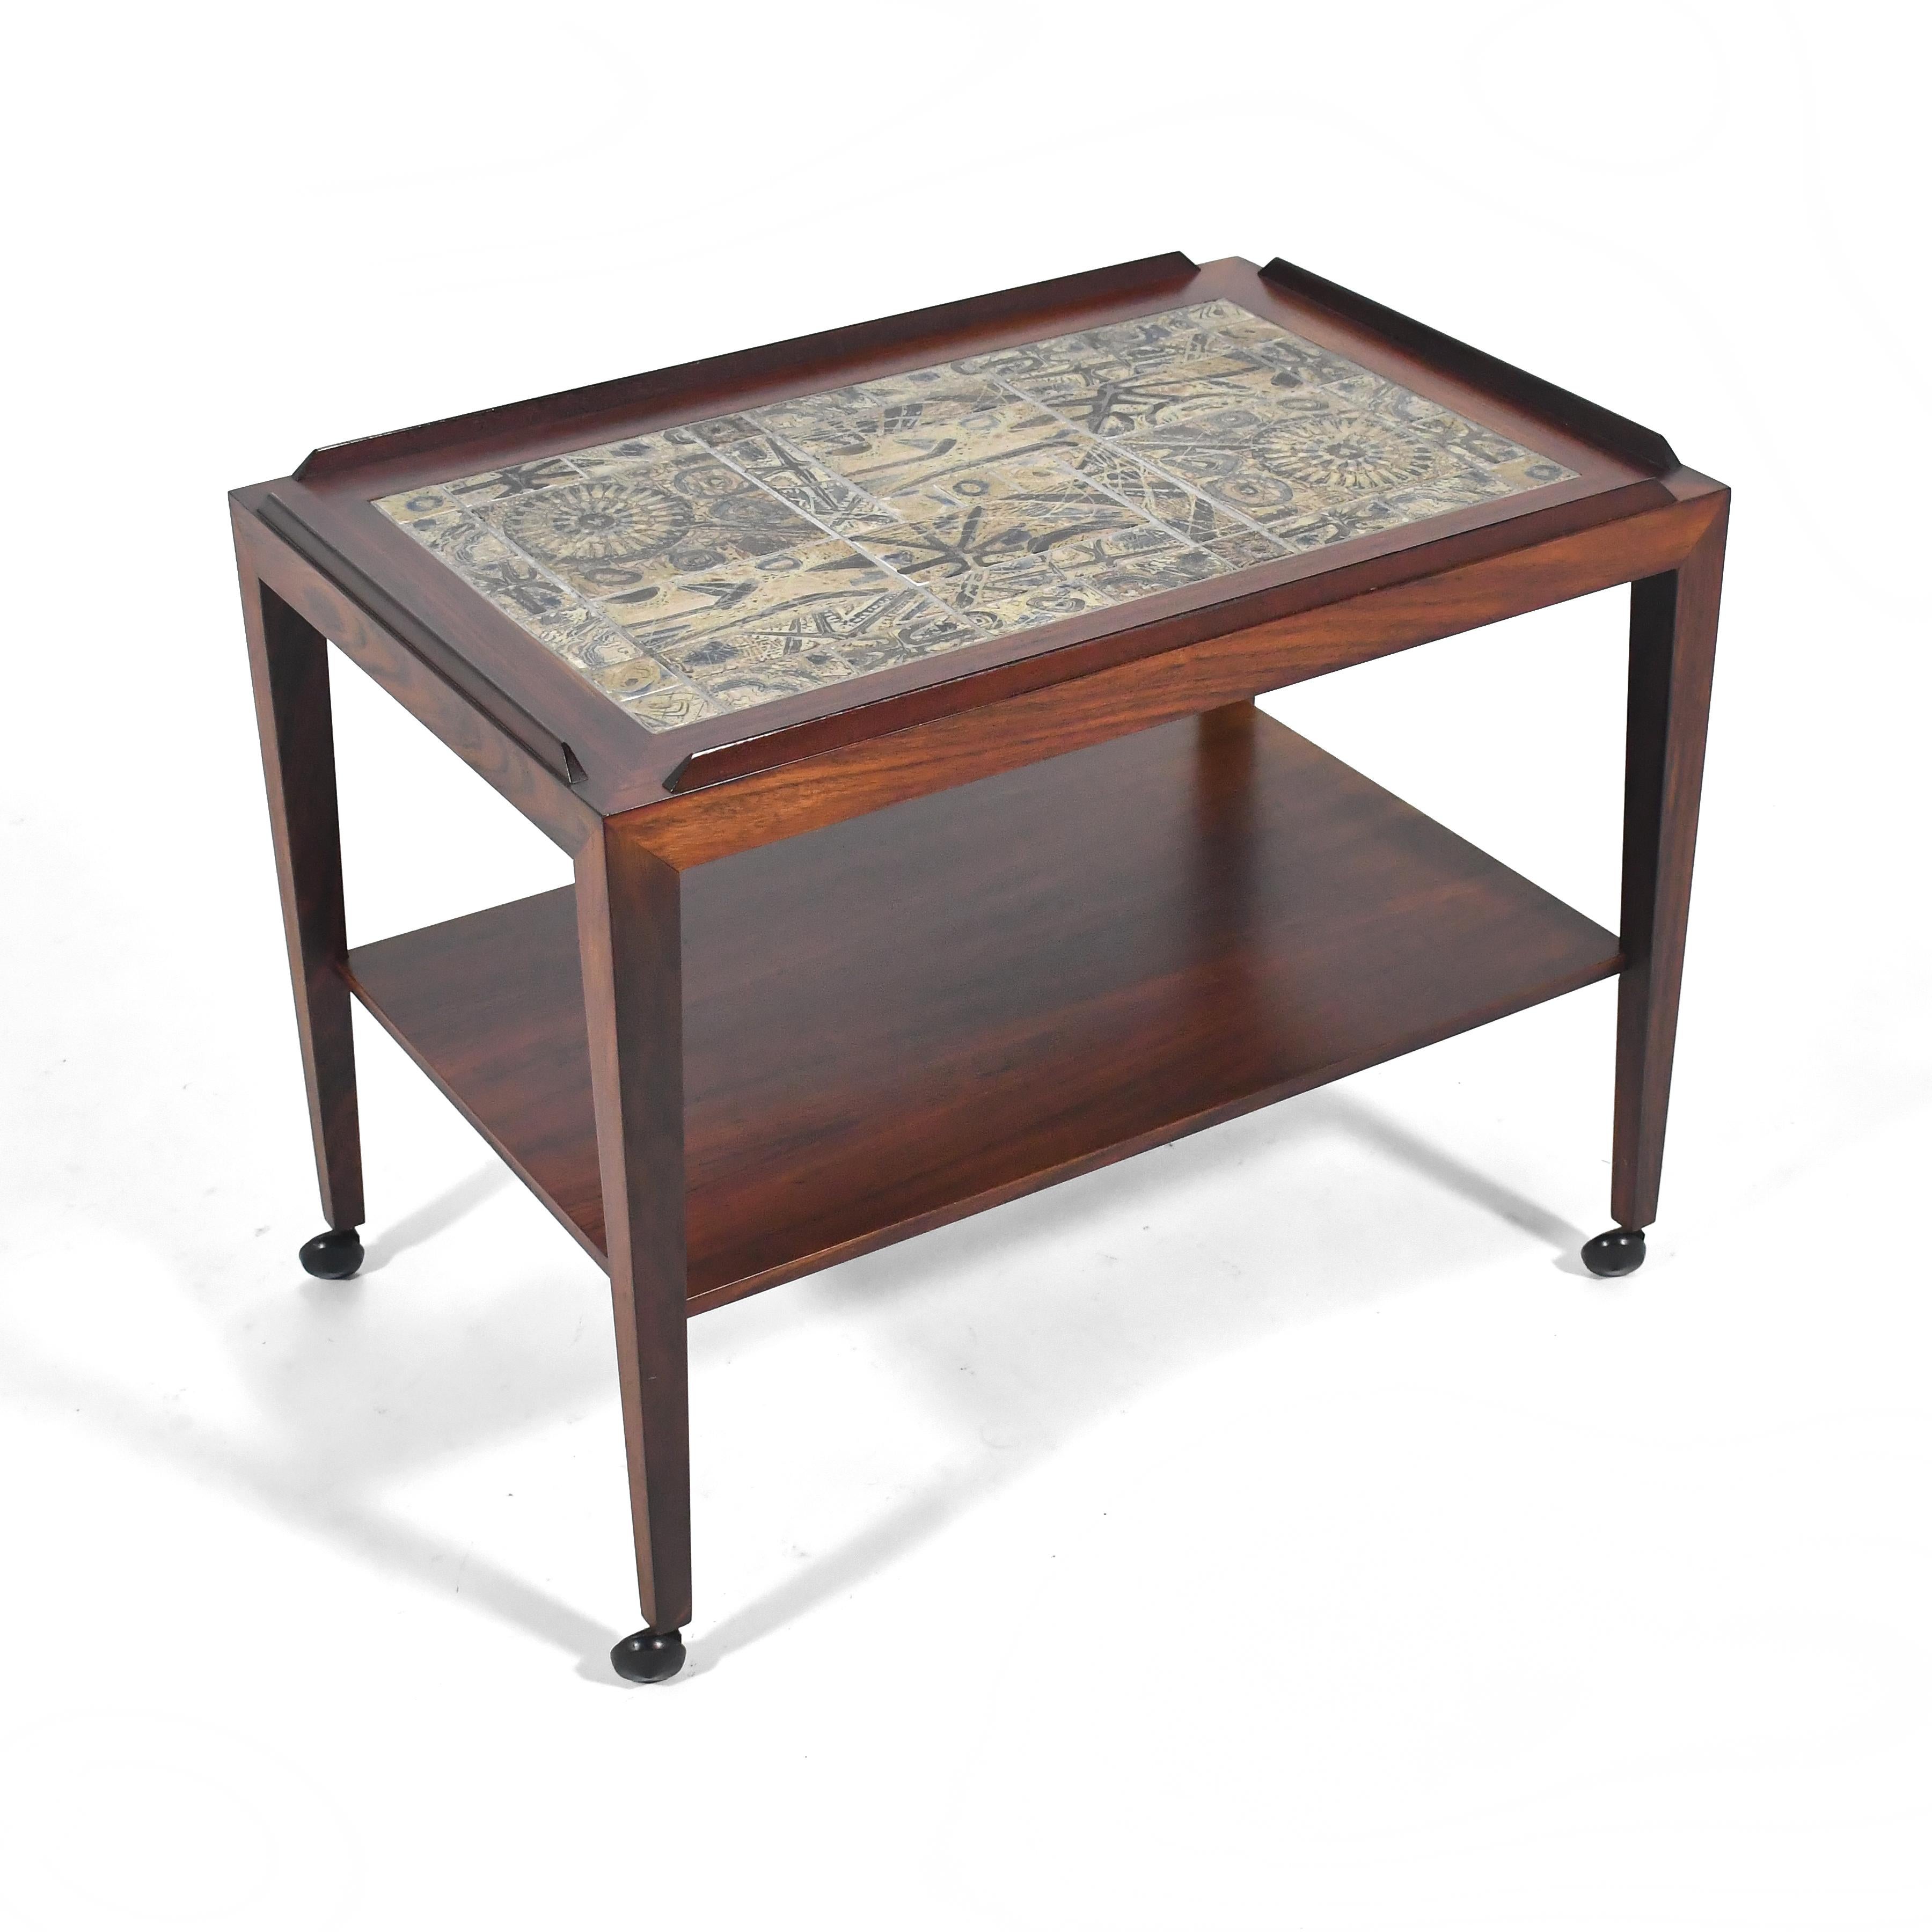 This exquisite Severin Hansen table executed by Haslev Mobelfabrik in rich rosewood has a beautiful top inlaid with Niels Thorsson tile by Royal Copenhagen.

Expertly crafted with many subtle details, the table also has casters, offering it mobility